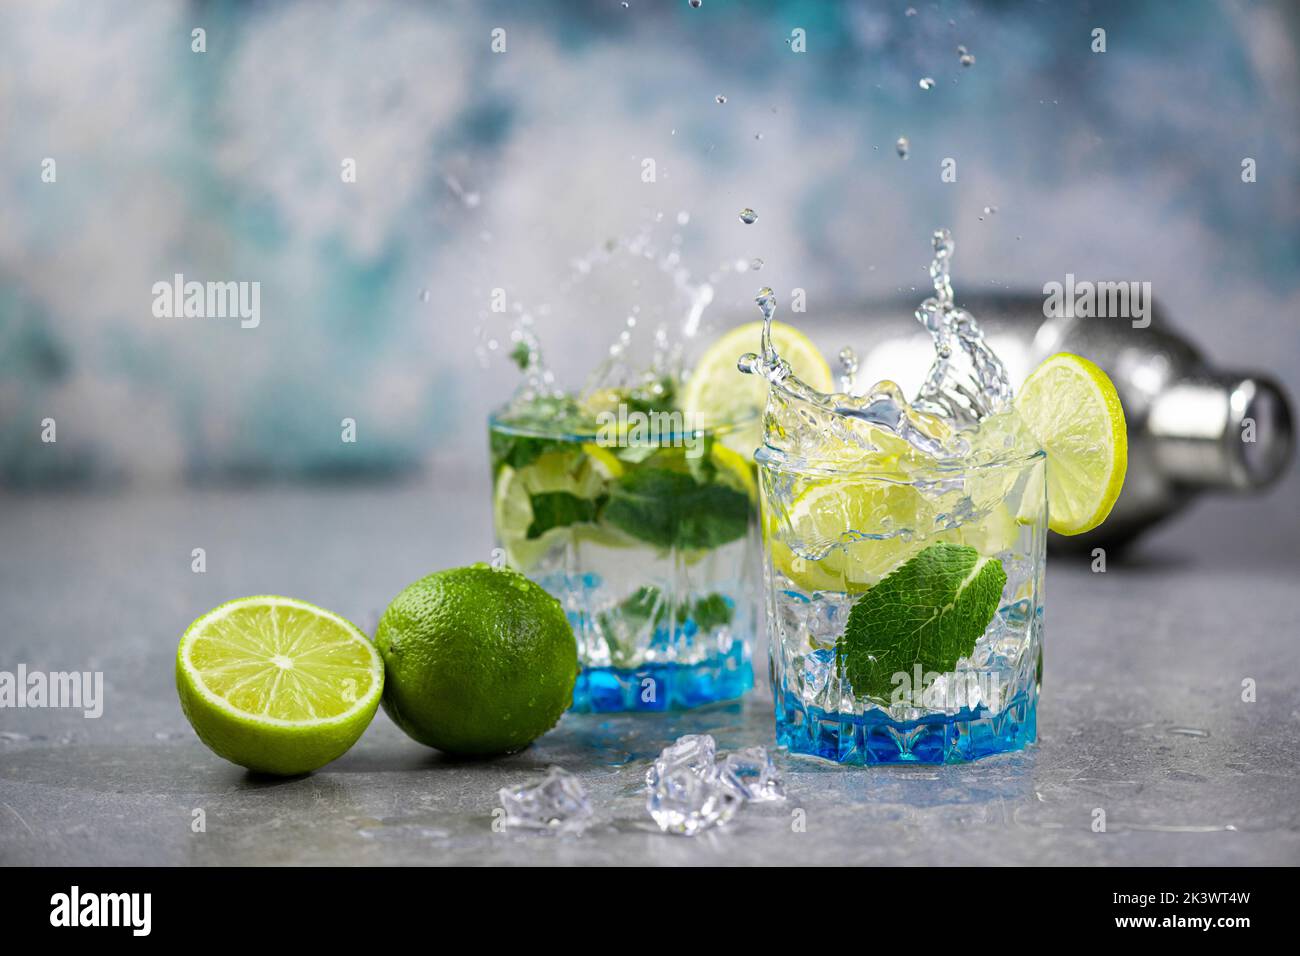 https://c8.alamy.com/comp/2K3WT4W/summer-alcoholic-cocktail-mojito-with-rum-mint-lime-and-ice-bar-tools-on-concrete-gray-blue-background-mojito-cocktail-with-splash-and-drops-2K3WT4W.jpg